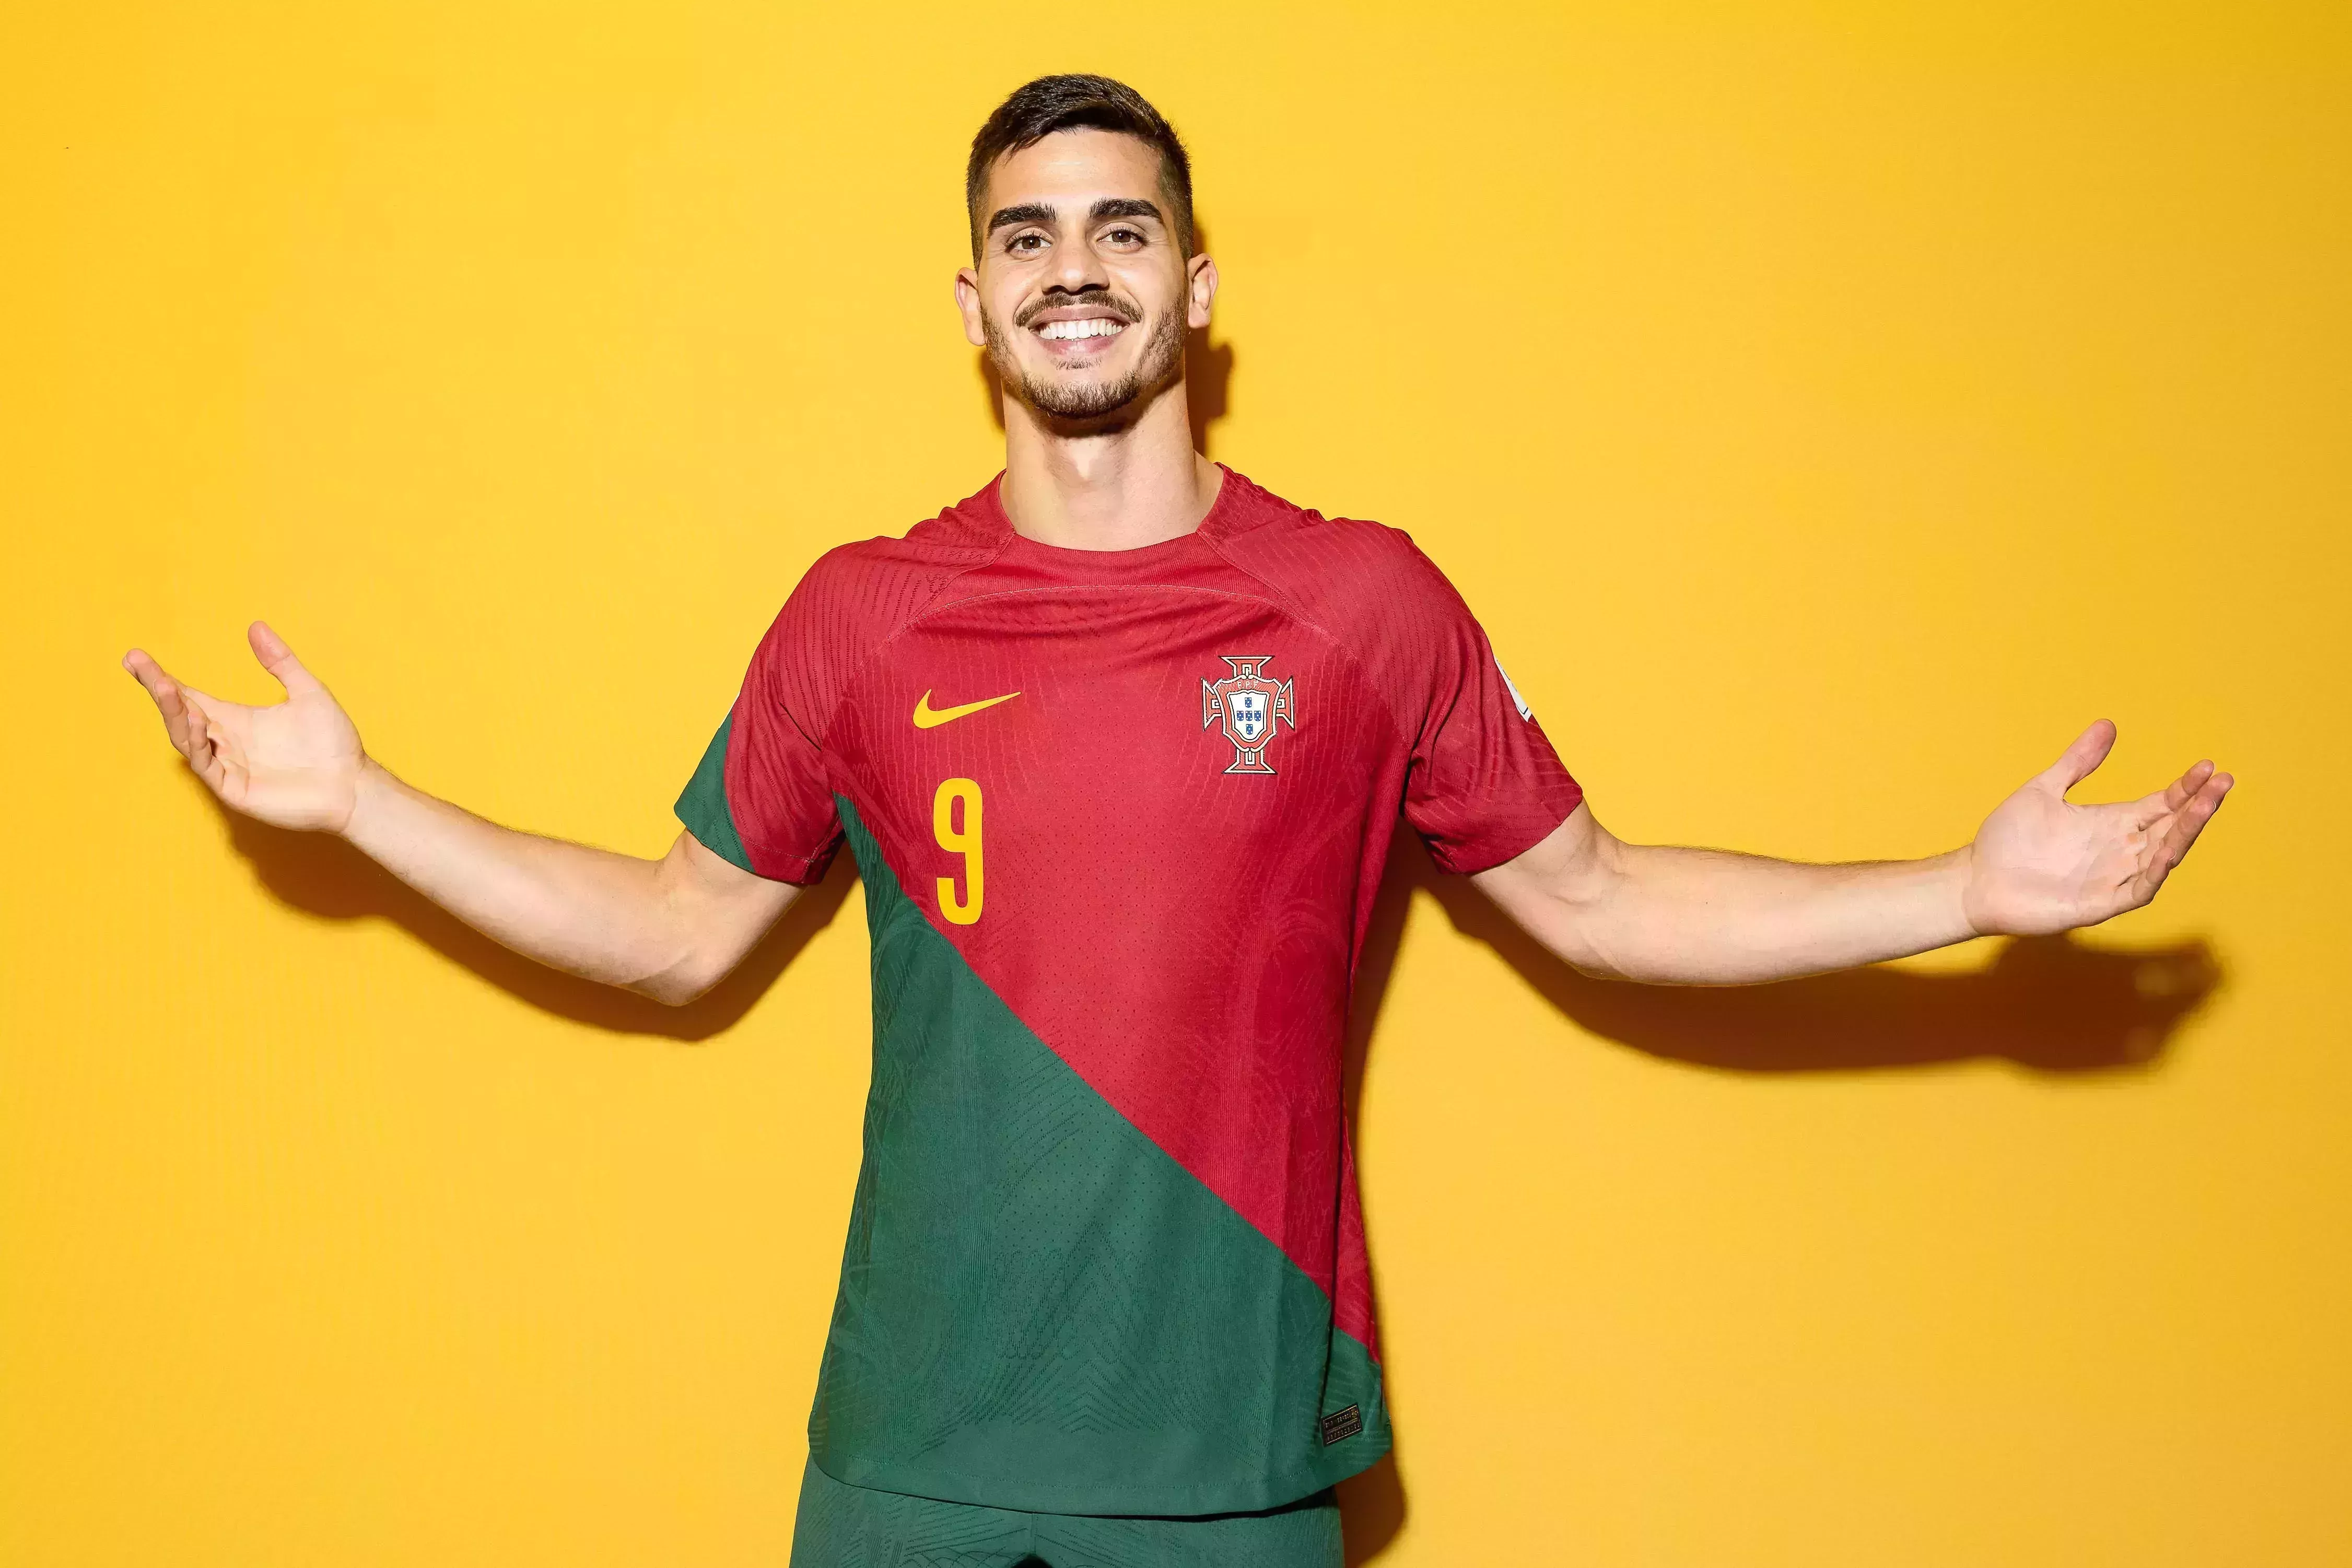 doha, qatar november 19 andre silva of portugal poses during the official fifa world cup qatar 2022 portrait session on november 19, 2022 in doha, qatar photo by lars baron fifafifa via getty images